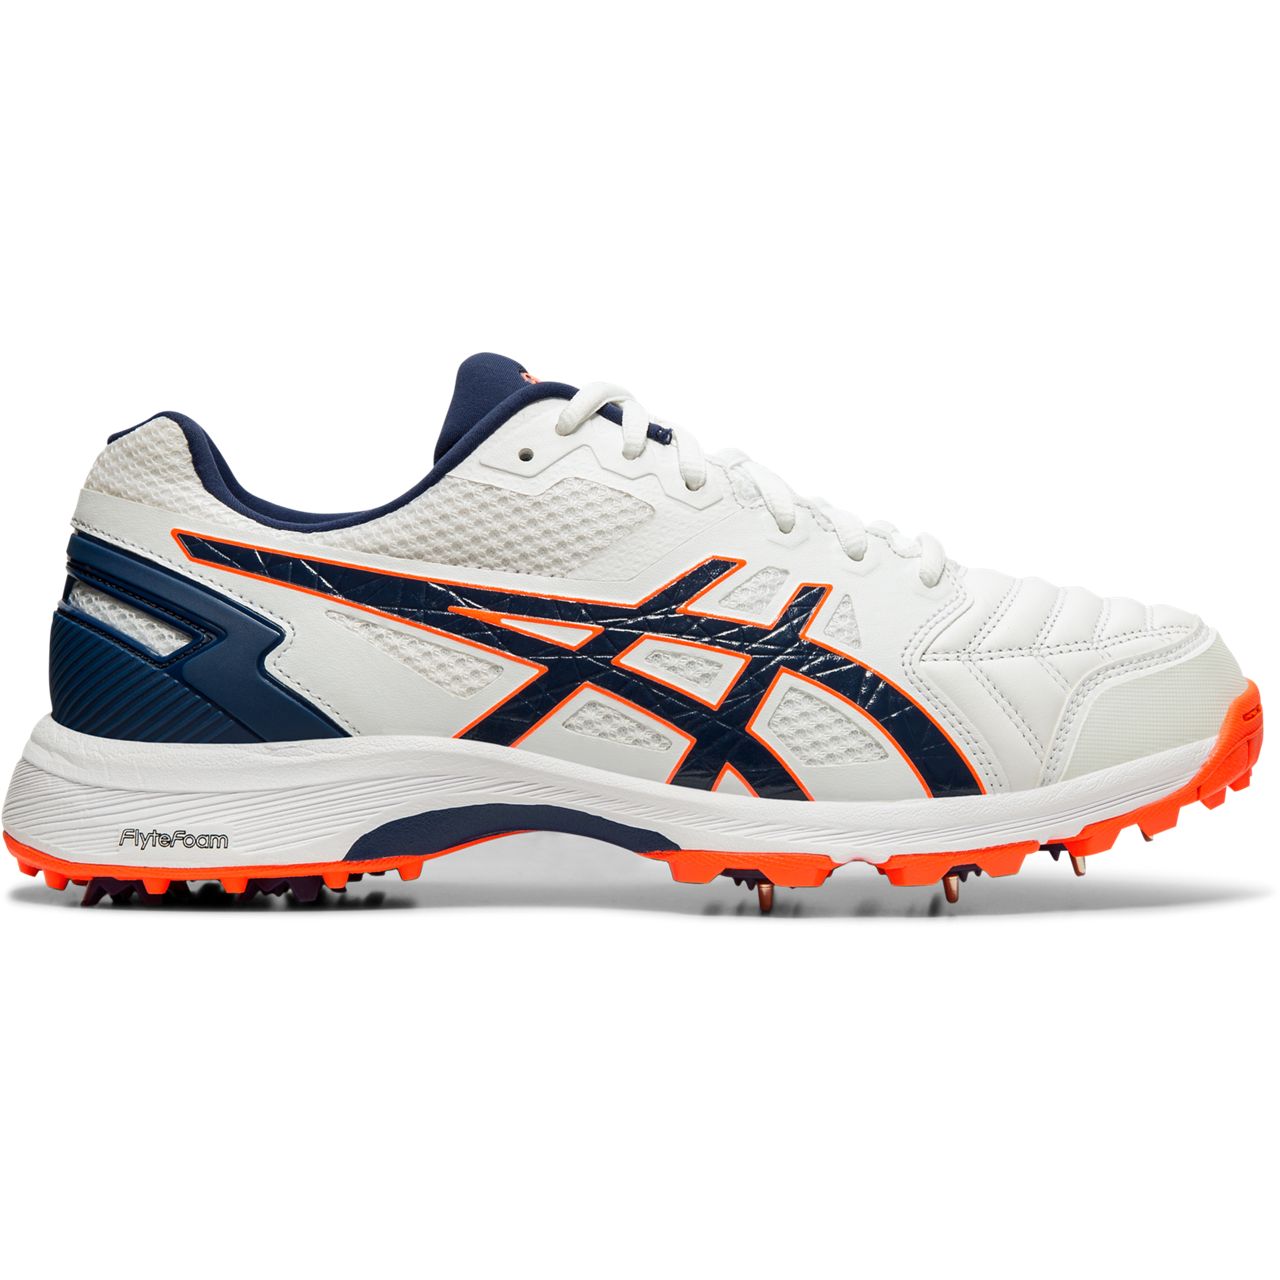 asics cricket spikes shoes online india